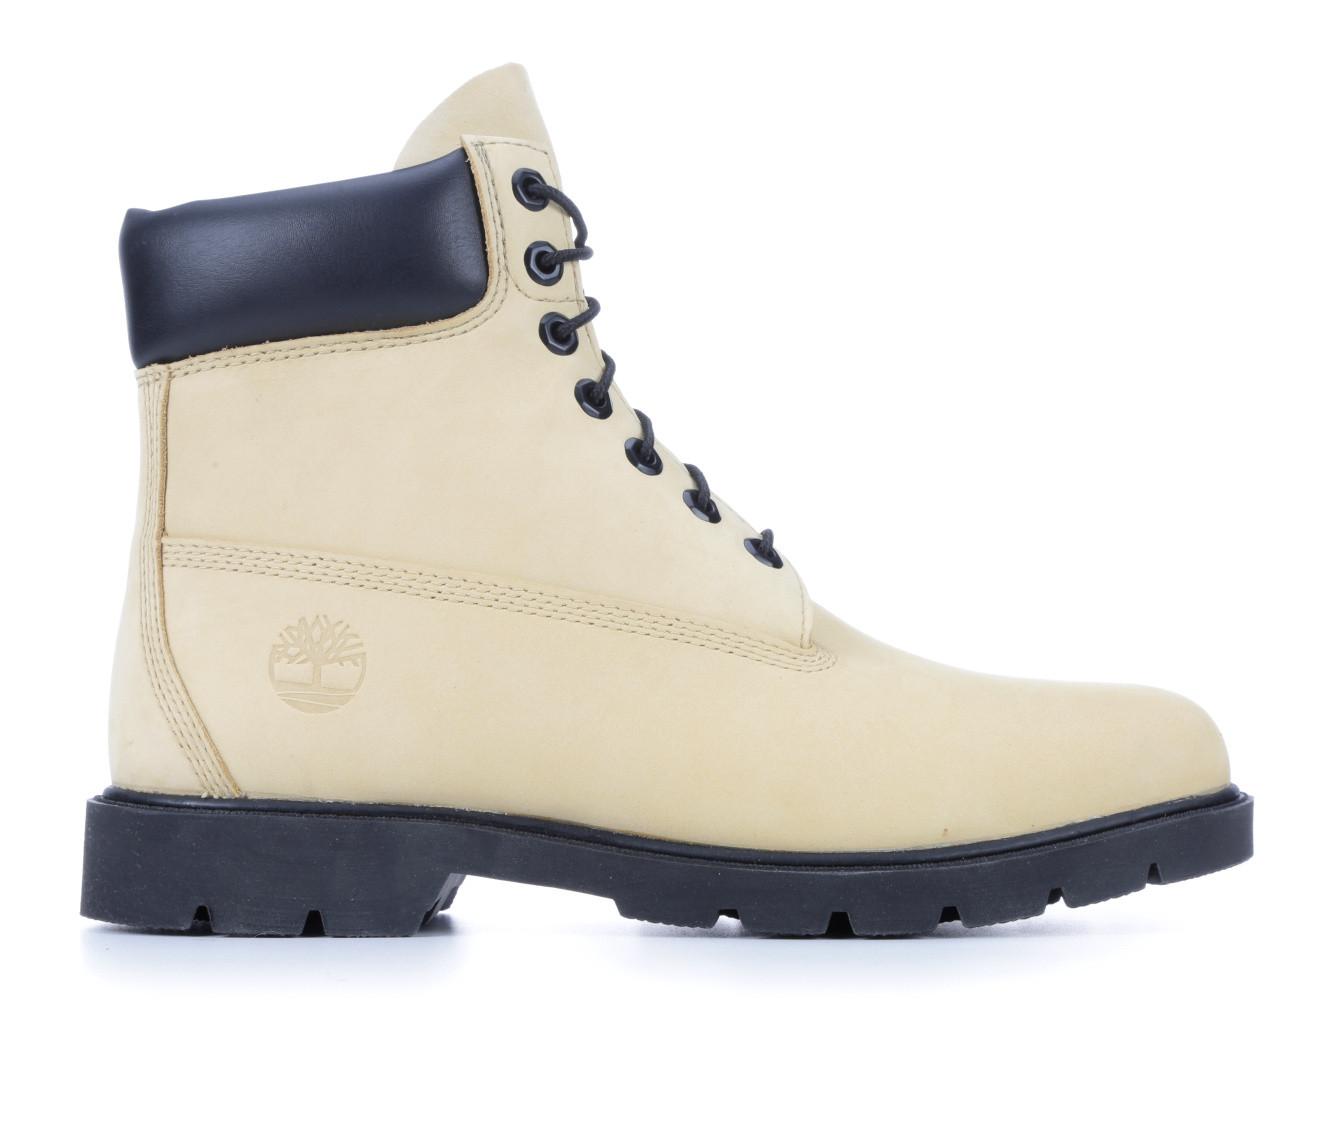 Men's Timberland 6 Inch Padded Contrast Collar Boots